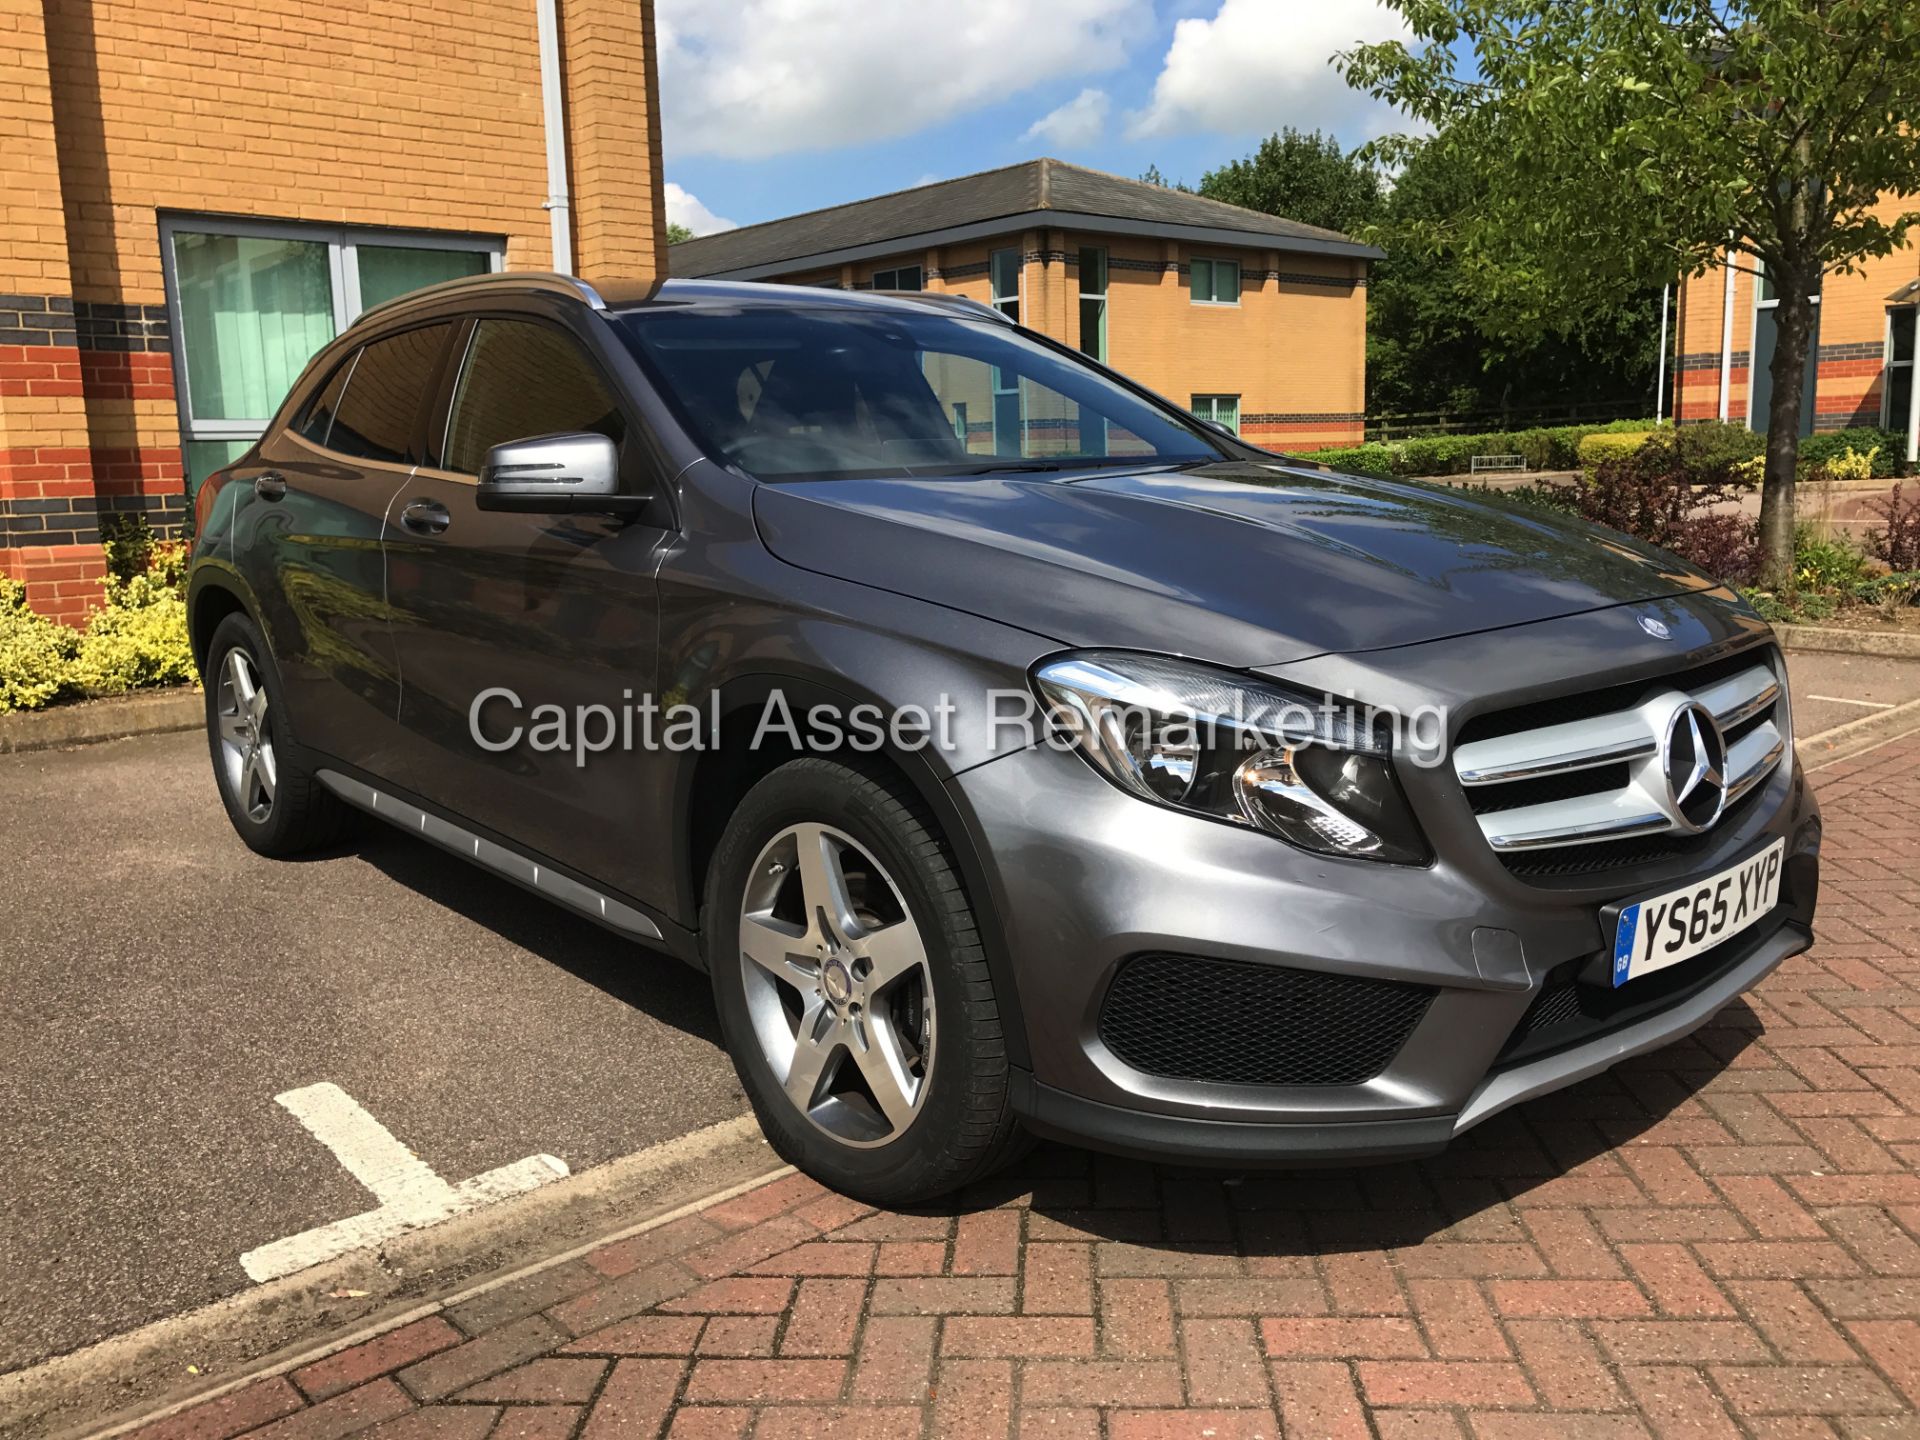 (On Sale) MERCEDES - BENZ GLA 220d "AMG LINE" 4 MATIC - 7G TRONIC AUTO - (2016 MODEL) 1 OWNER - Image 2 of 25